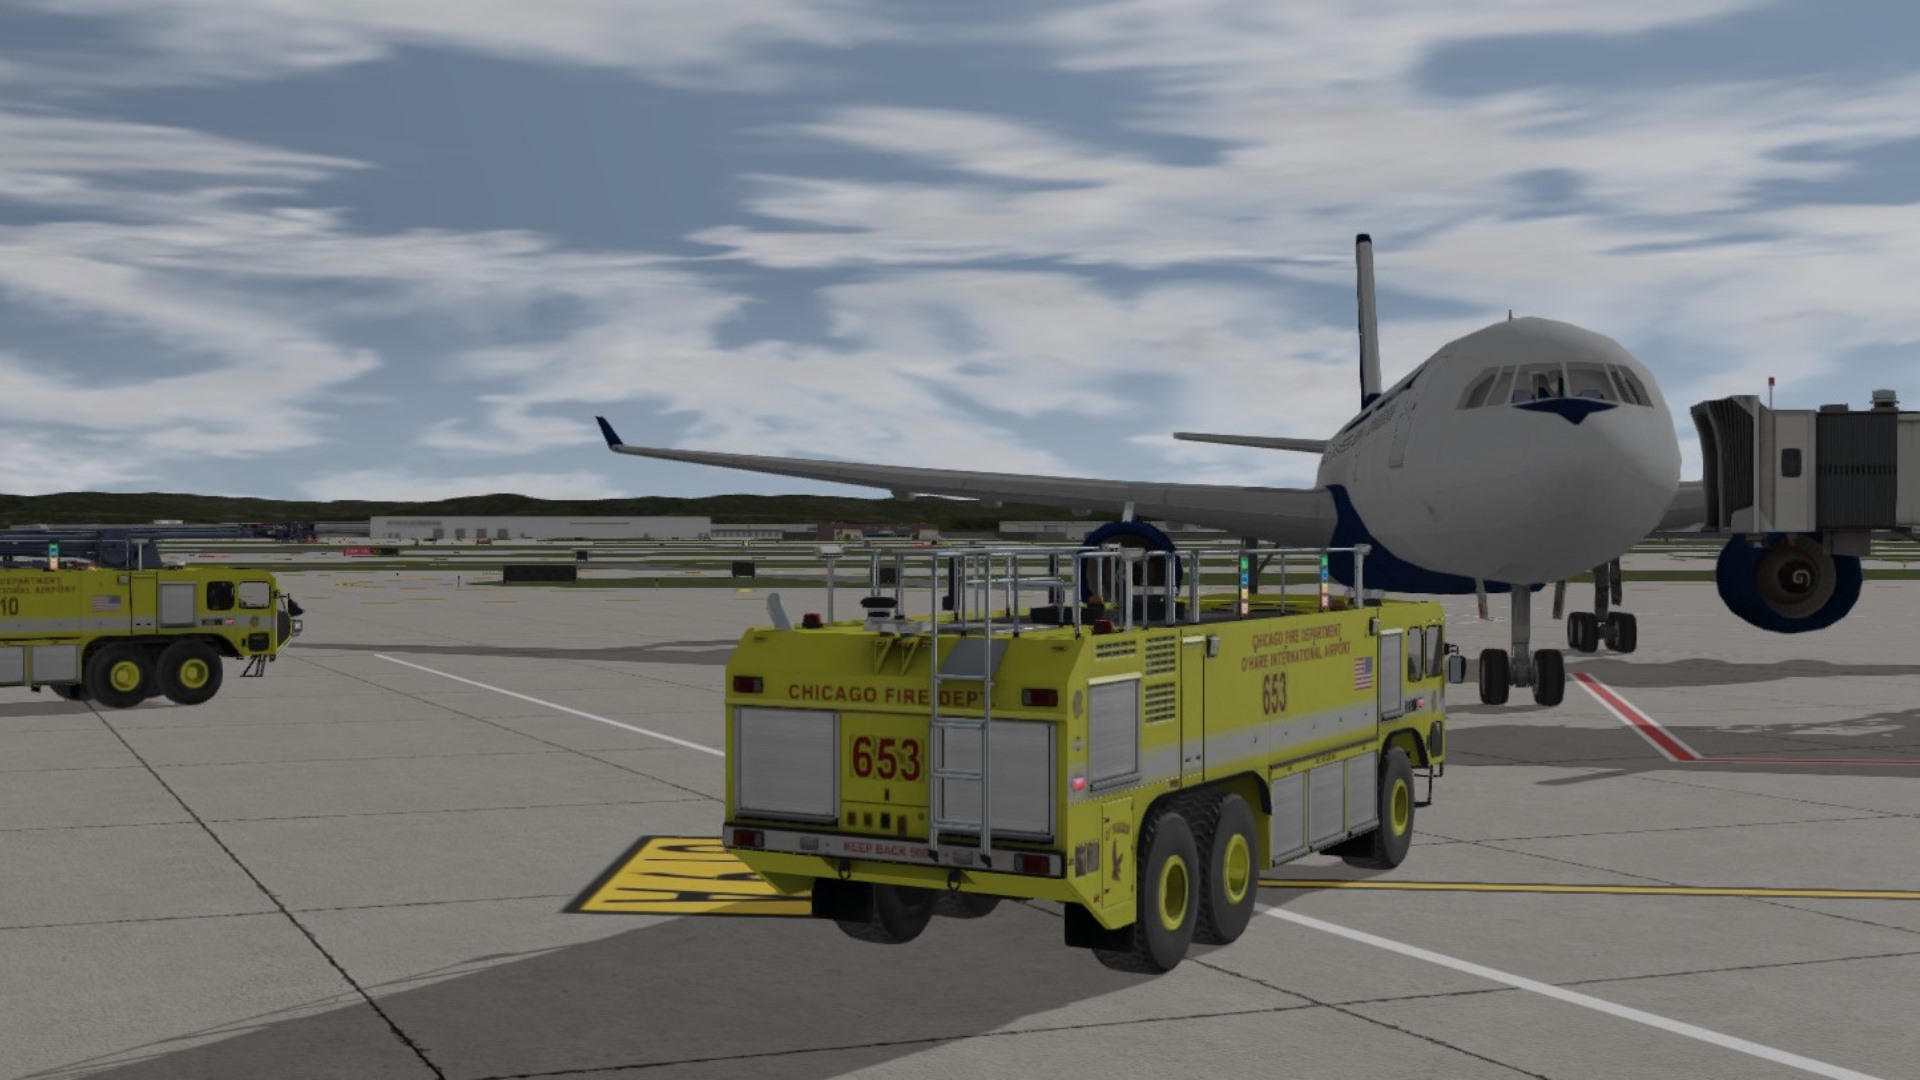 Oshkosh Striker ARFF Truck responding to an emergency at a gate with passengers ready to evacuate.